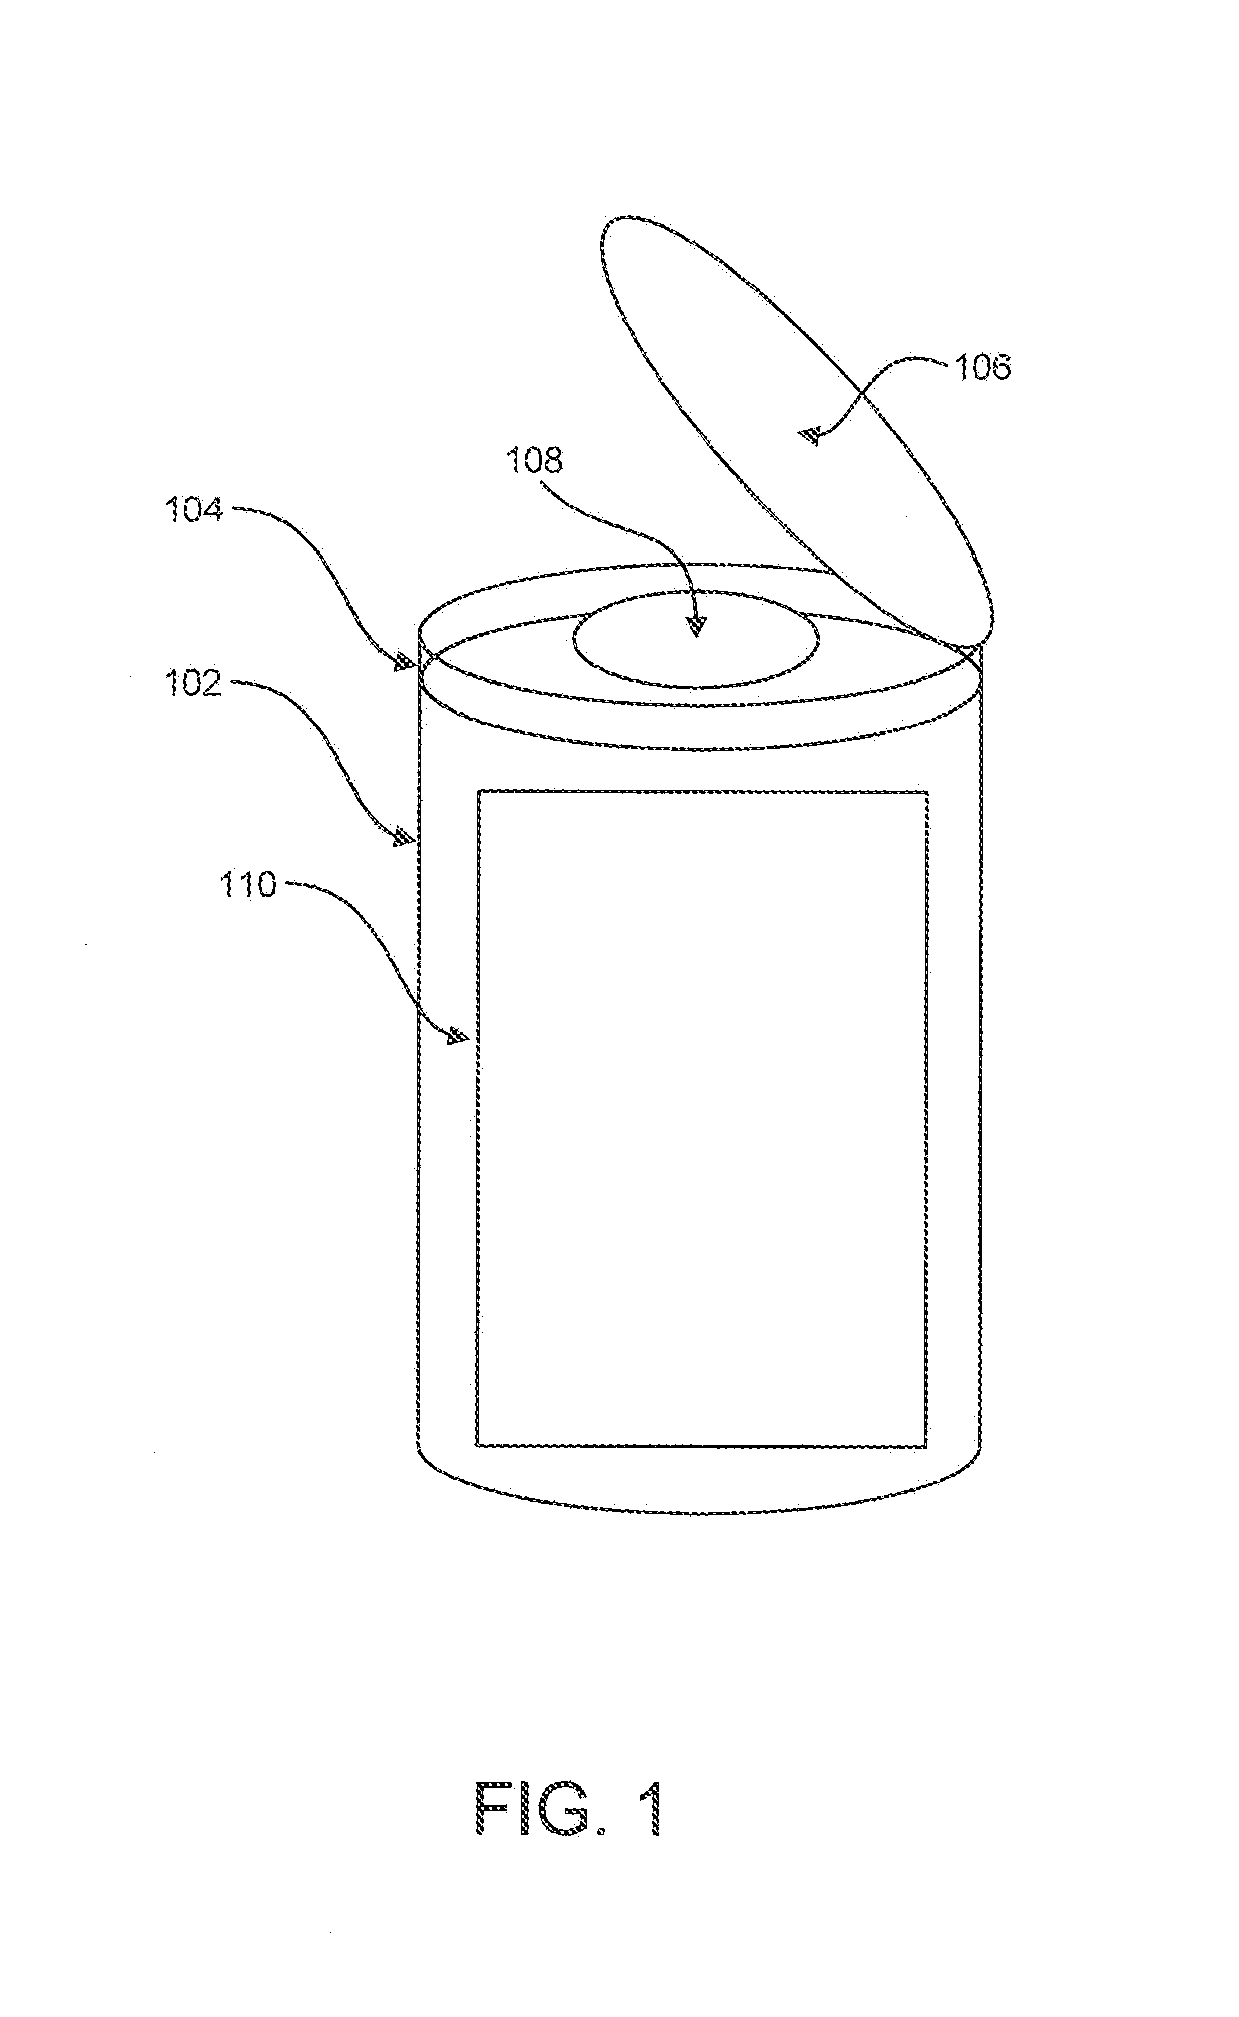 Refill article for wipes dispenser and assembly of both